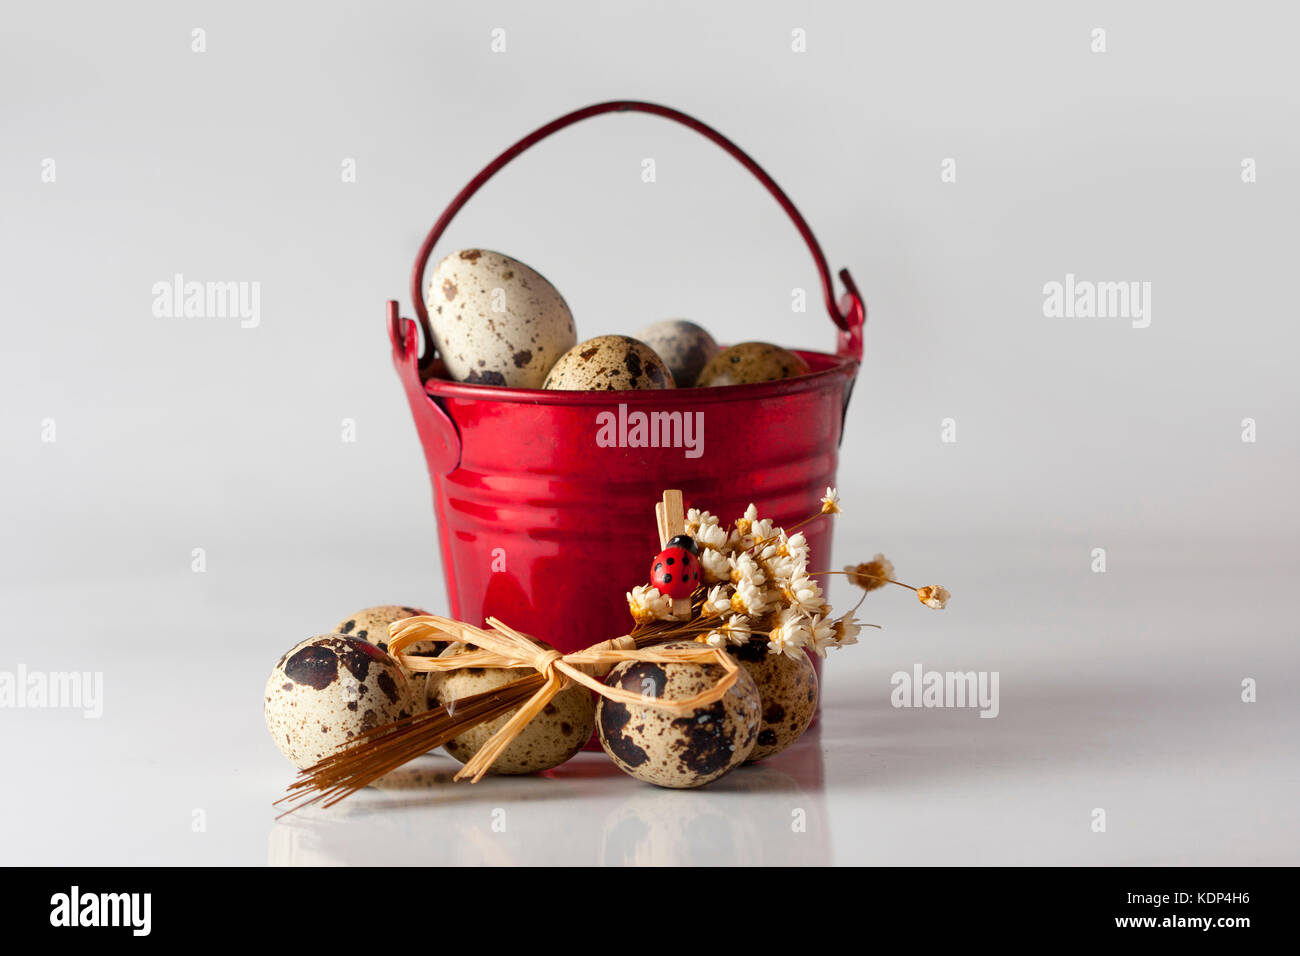 Small red pail with partridge eggs on the white background Stock Photo